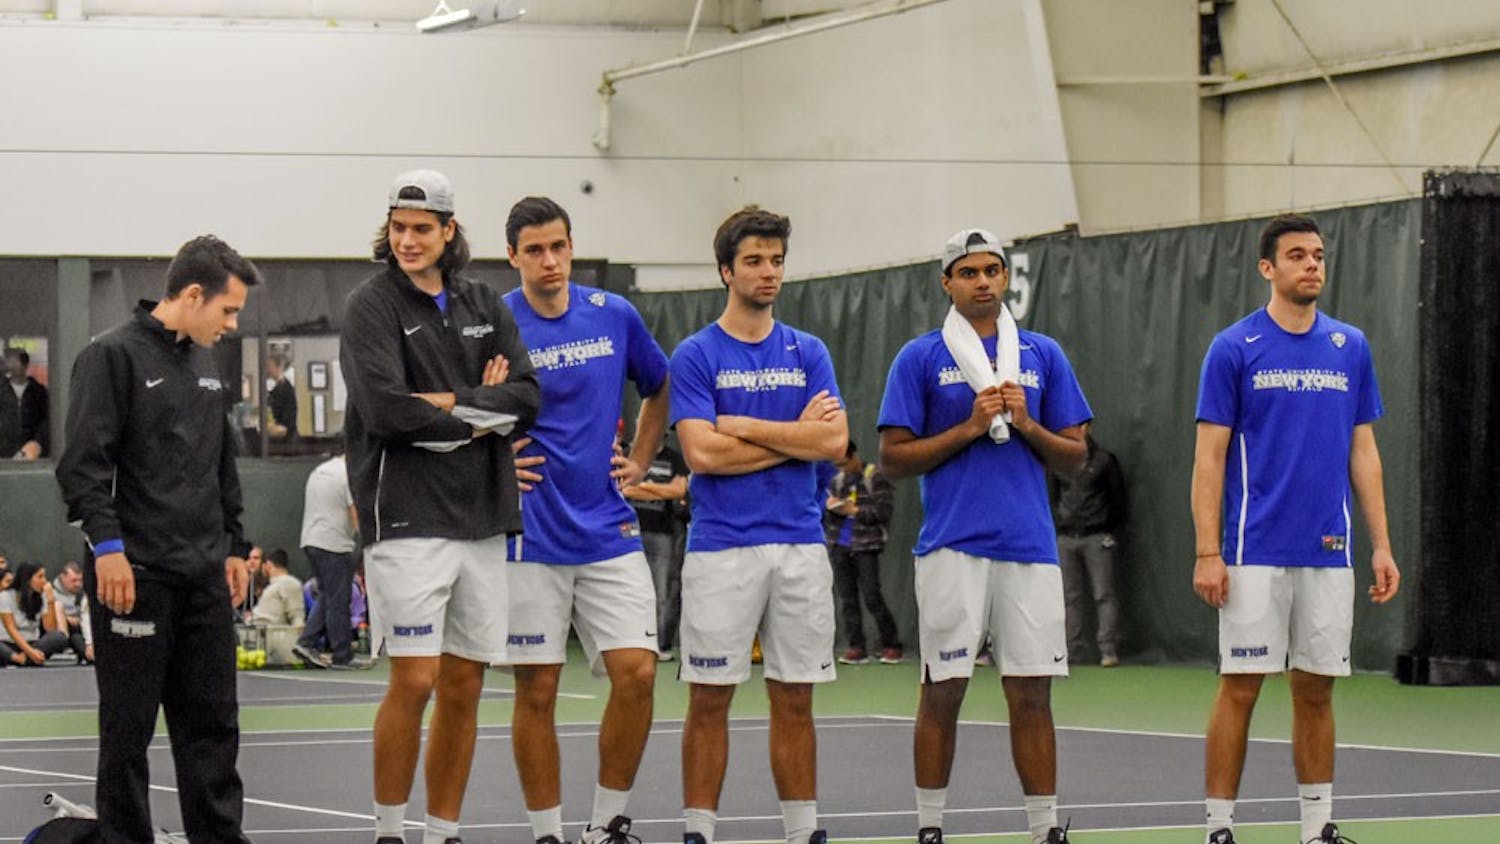 (Third in from left to right) The men’s tennis team’s seniors Amar Hromic, Pablo Alvarez and Akil Mehta, as well as Sergio Arevailillo (not pictured), had their UB careers come to an end on Friday with the Bulls’ season-ending loss in the Mid-American Conference Championships Semifinals.